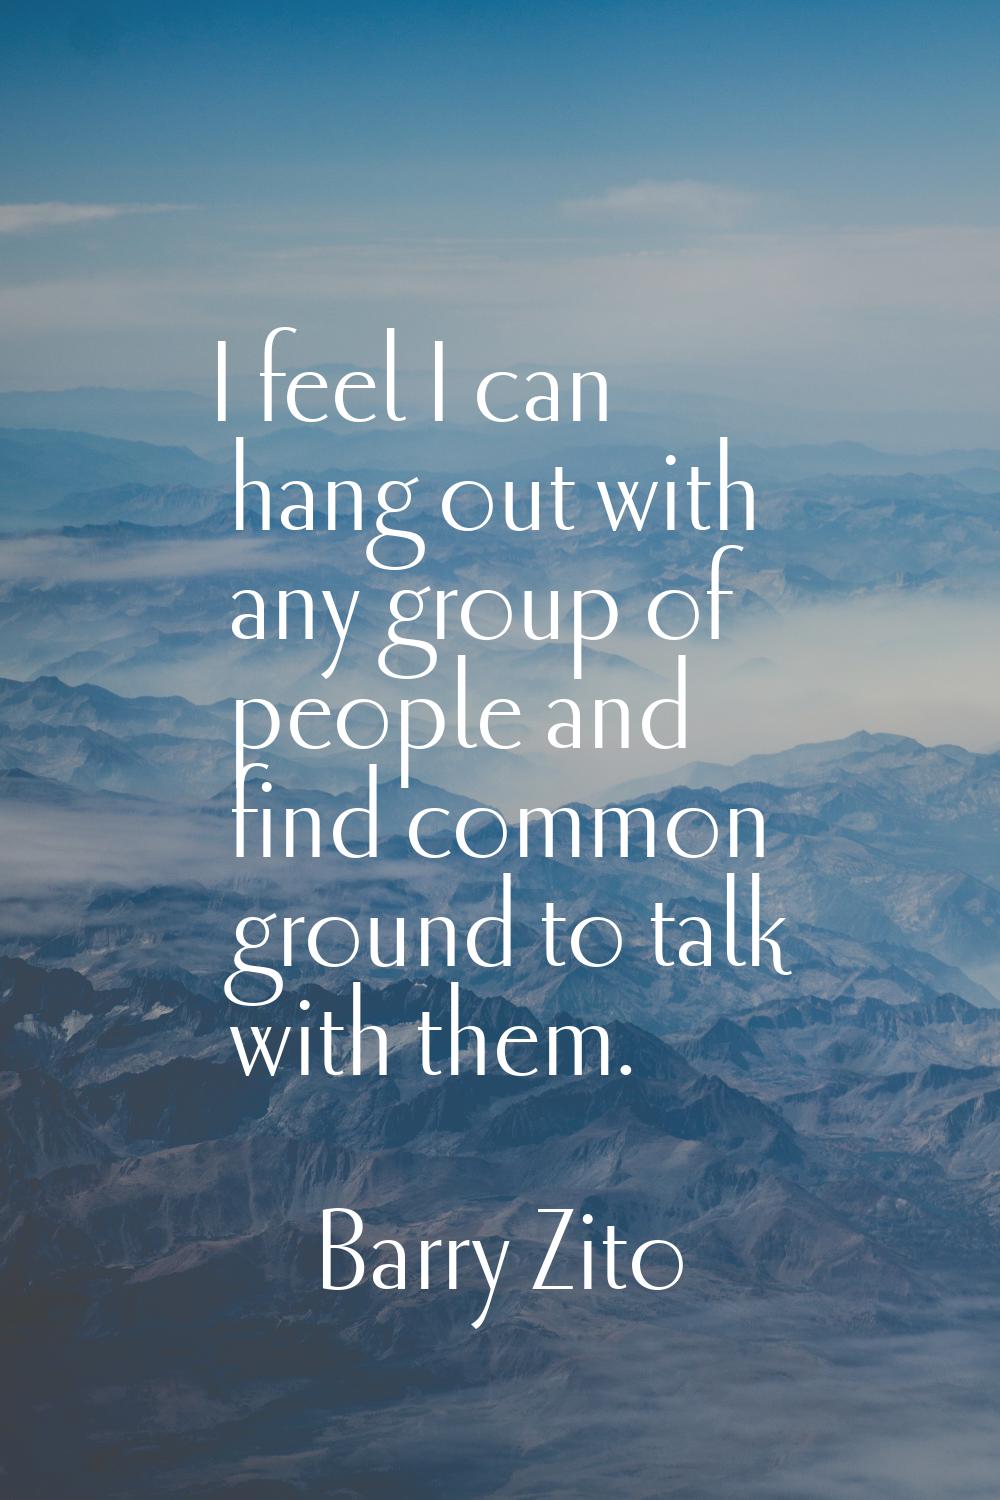 I feel I can hang out with any group of people and find common ground to talk with them.